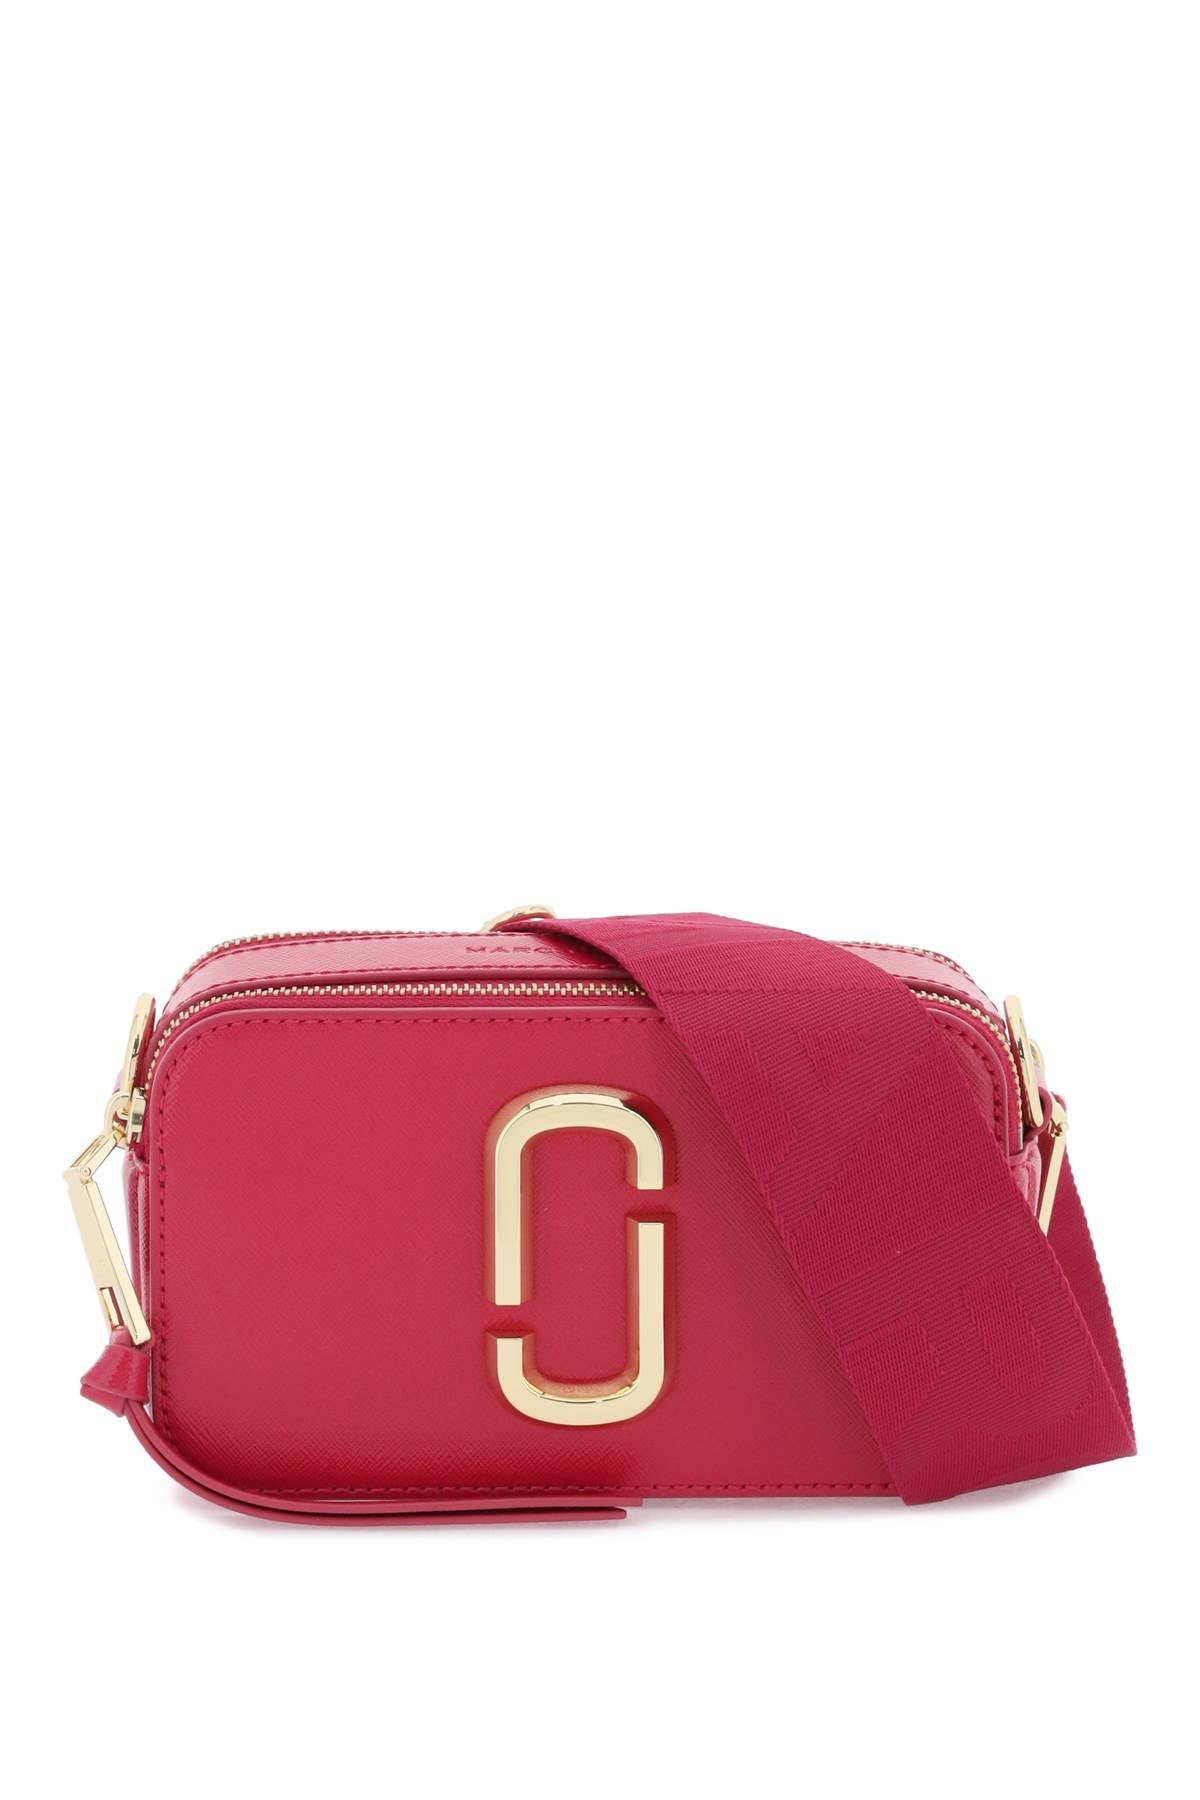 Marc jacobs the utility snapshot camera bag-0